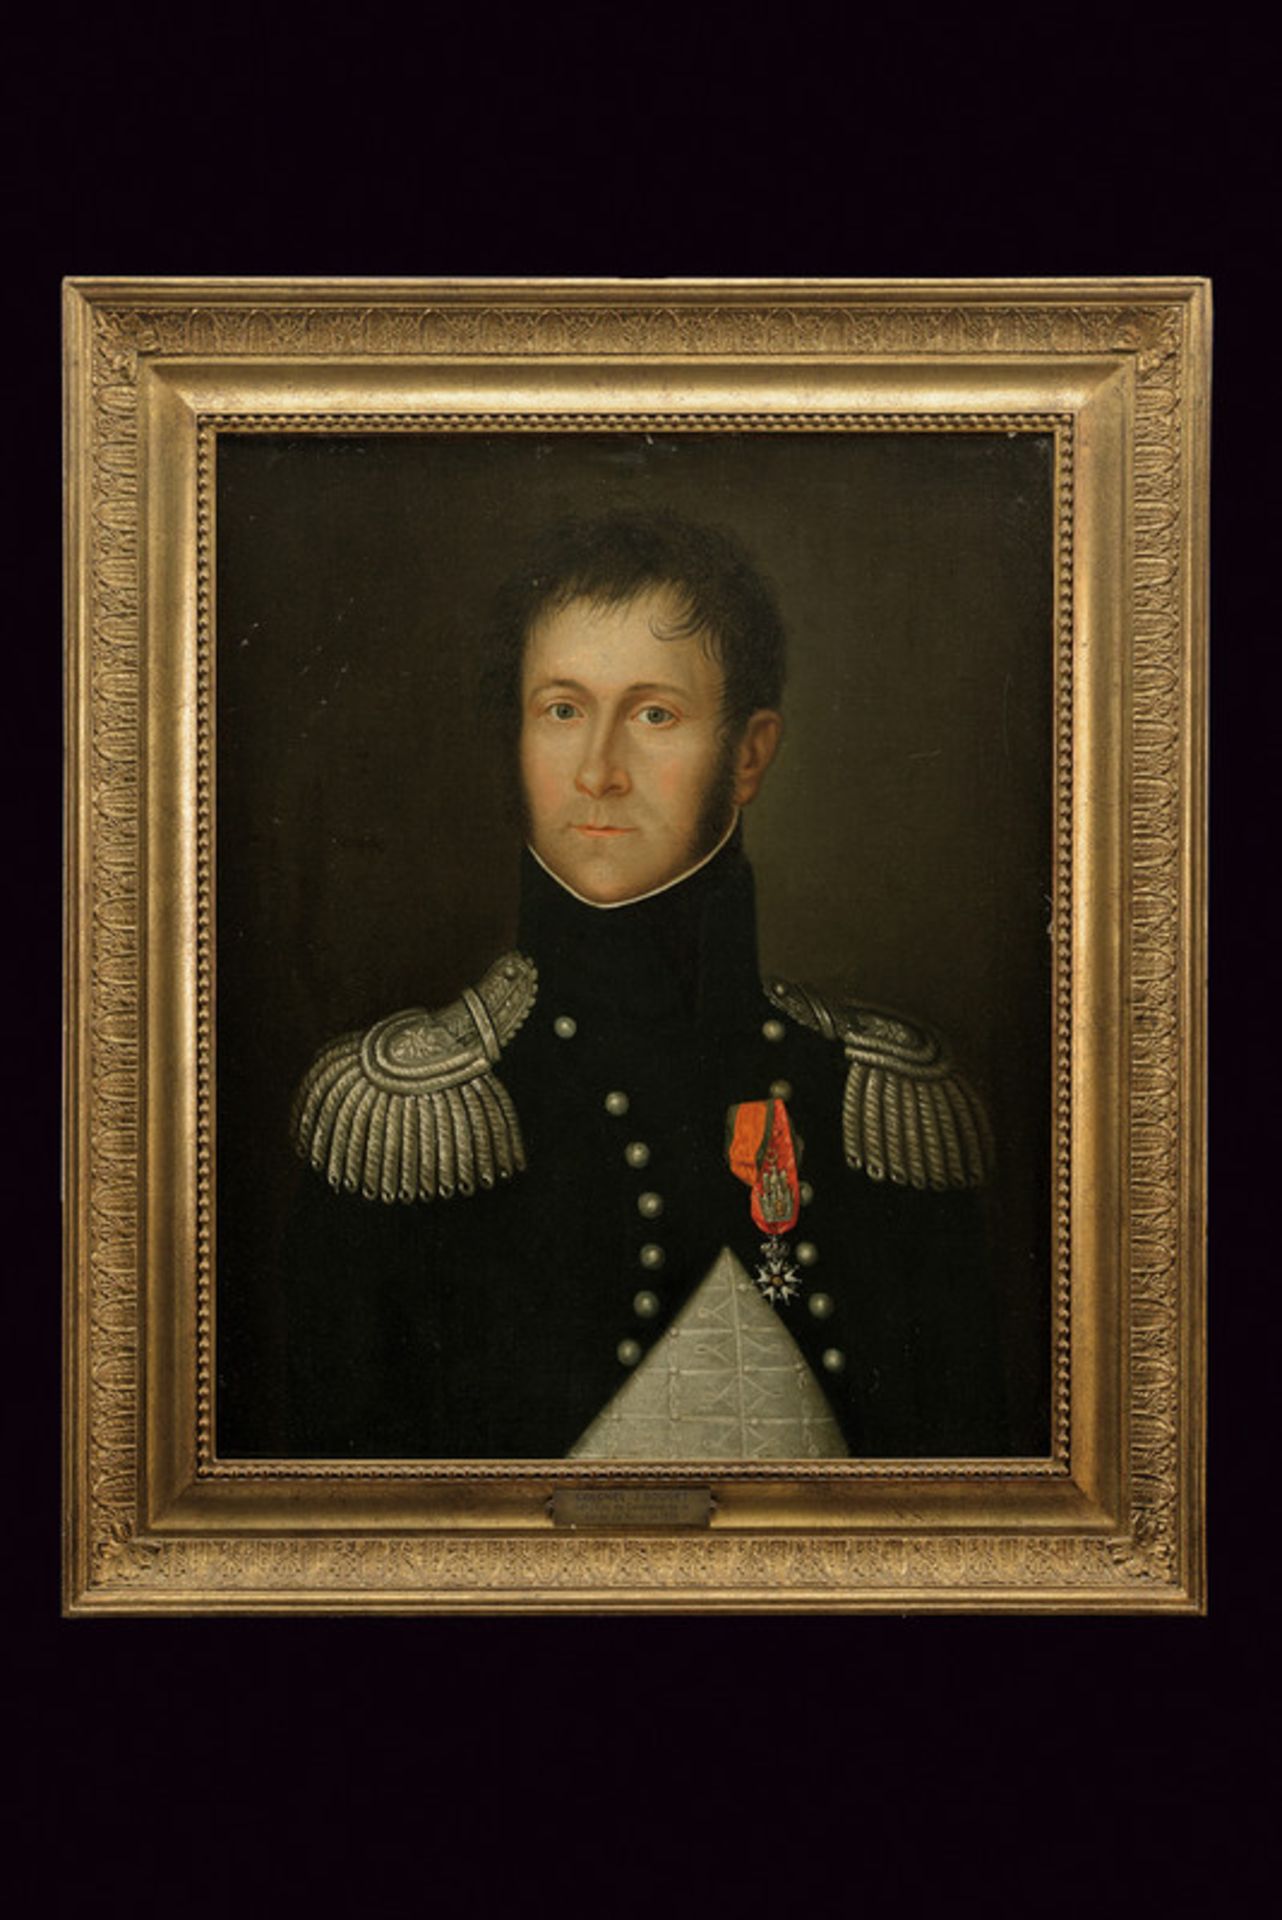 Gouget, Colonel J. dating: first quarter of the 19th Century provenance: France Oil on paper. Fine - Image 6 of 6